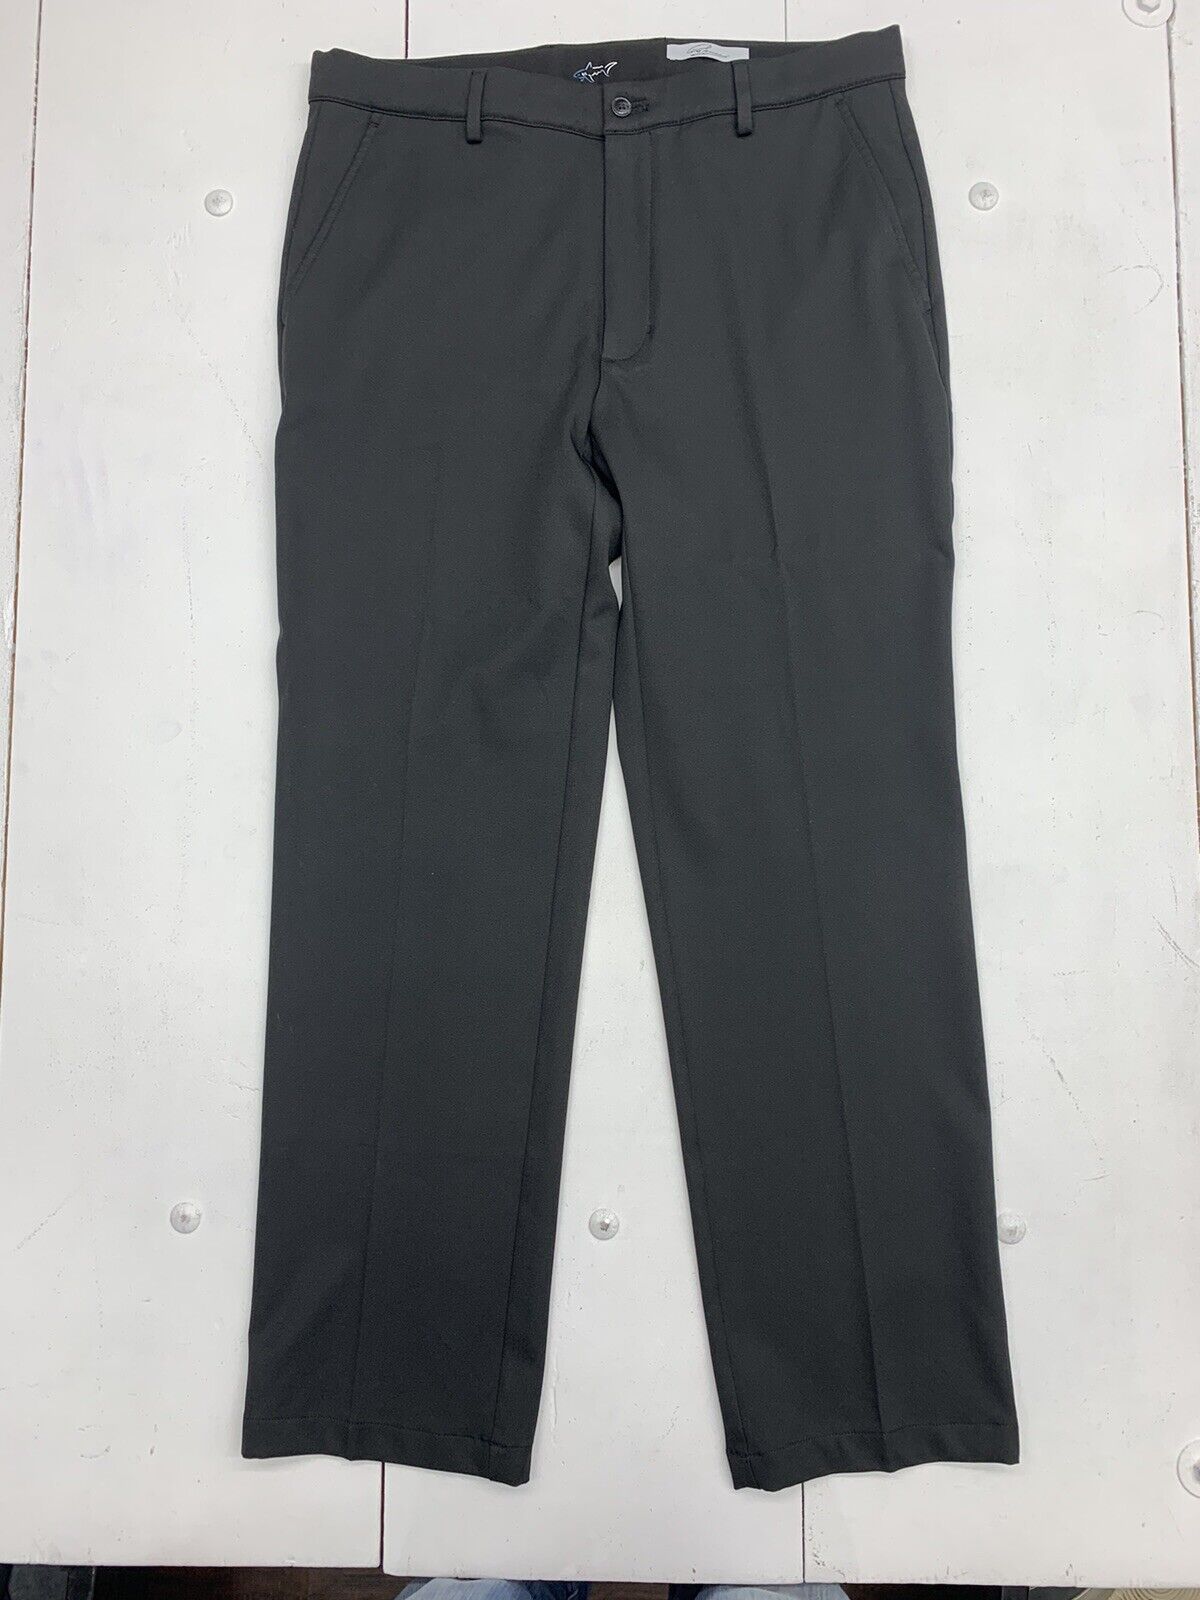 Attack Life by Greg Norman Men's Moisture Wicking Professional Dress Pants  Black Size 33X30